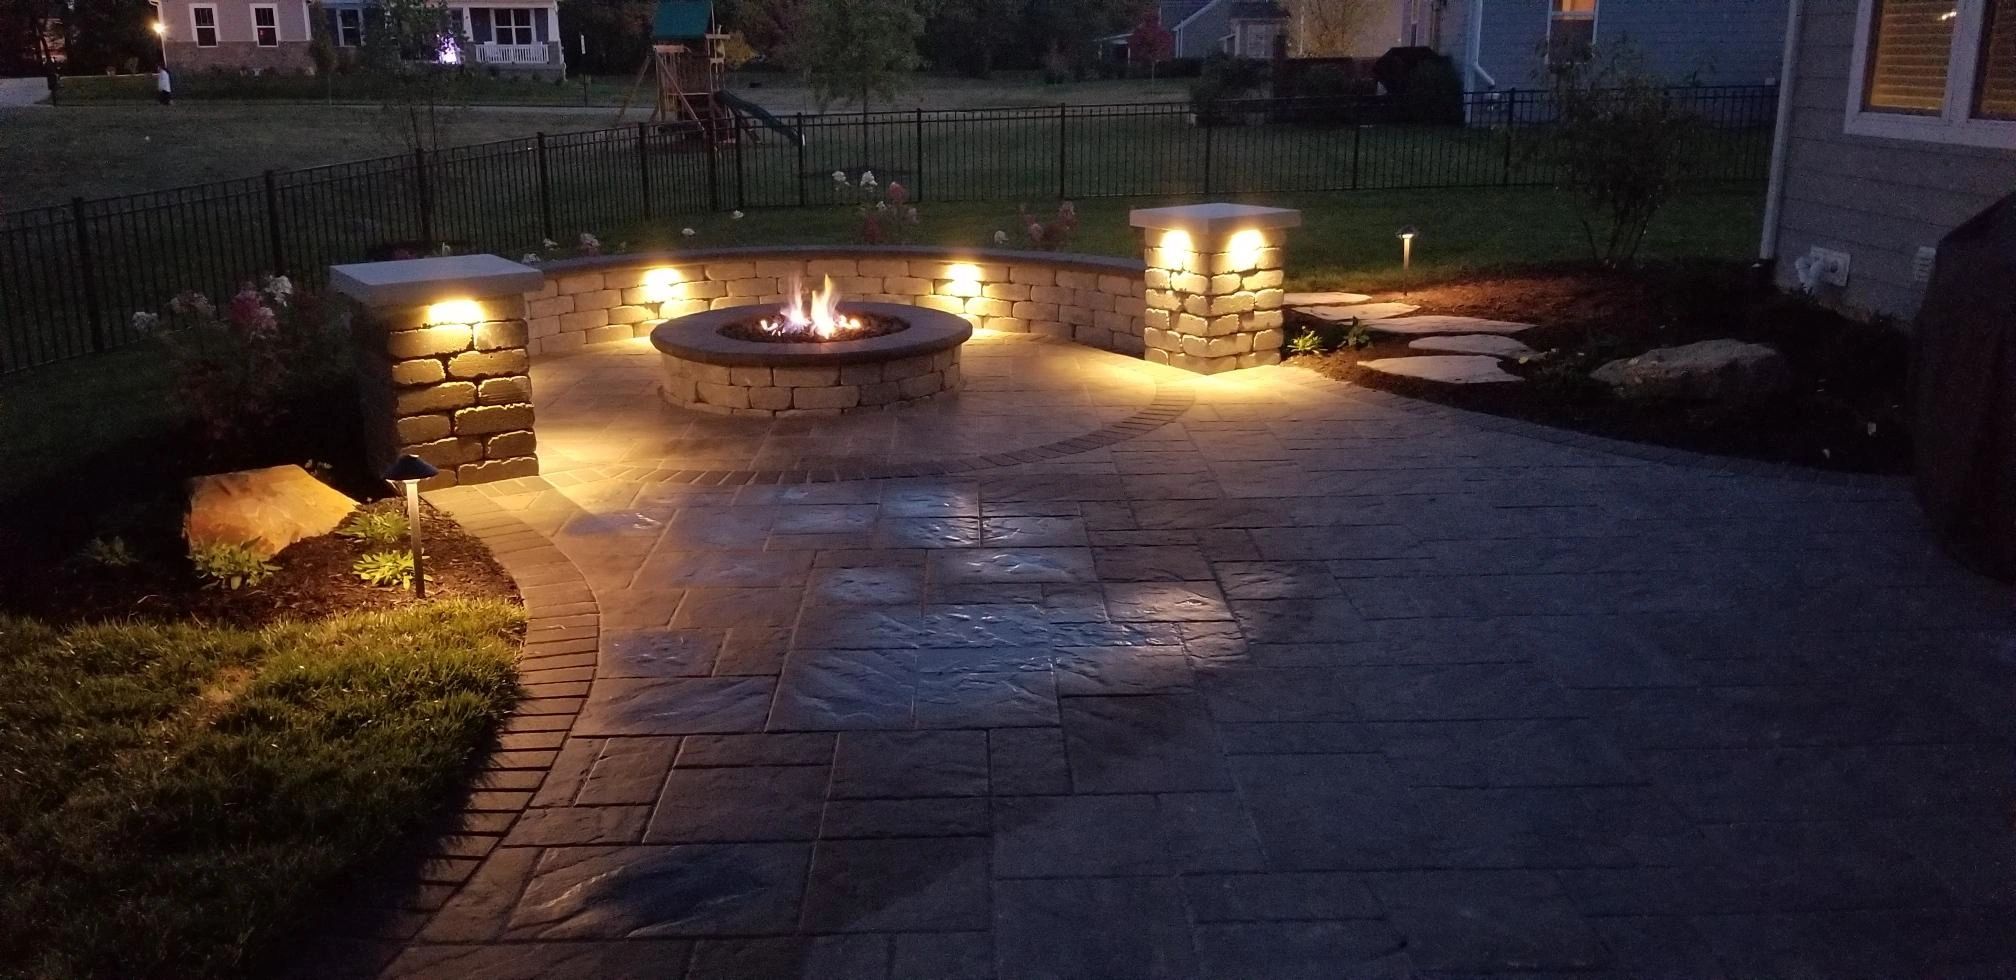 Paver patio with built in seating & lighting, and gas brick fireplace